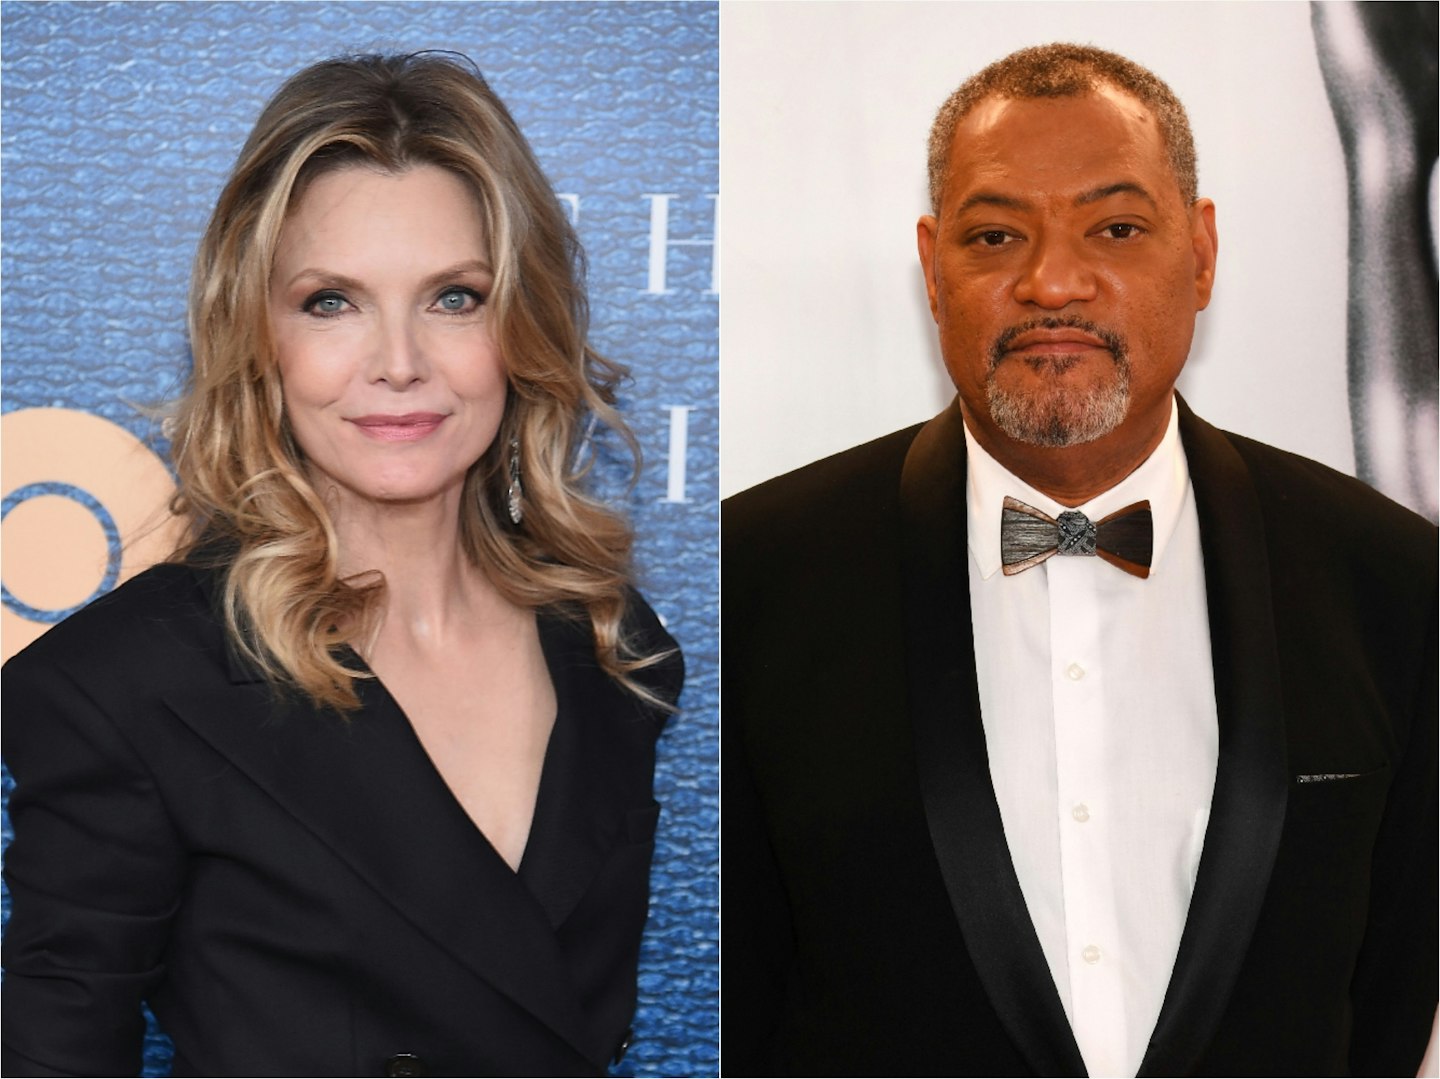 Michelle Pfeiffer and Laurence Fishburne